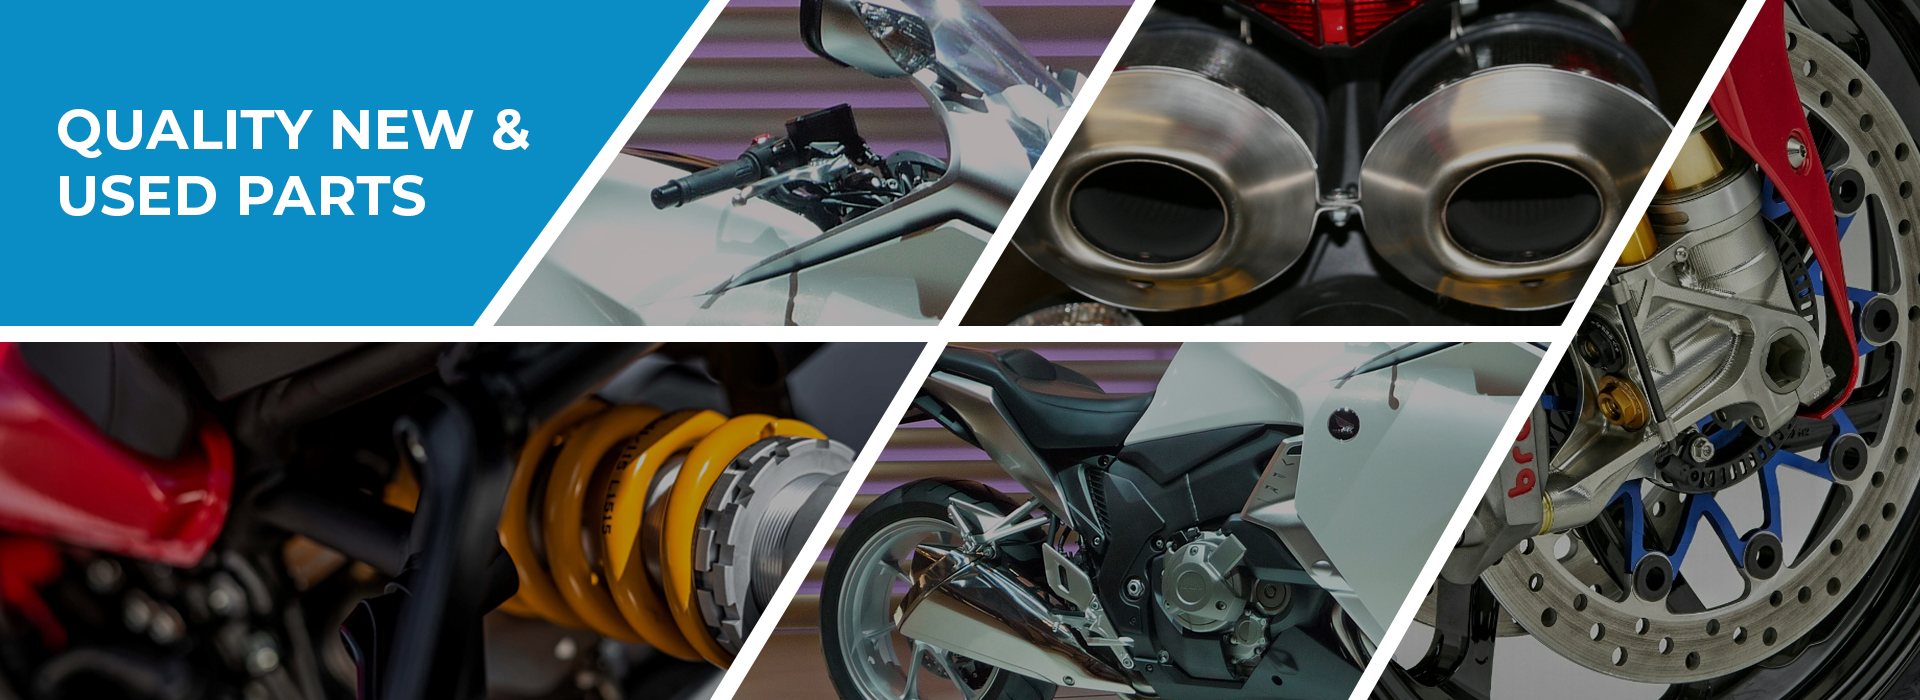 New Motorcycle Parts Used, Second Hand Bike Parts and Accessories Online